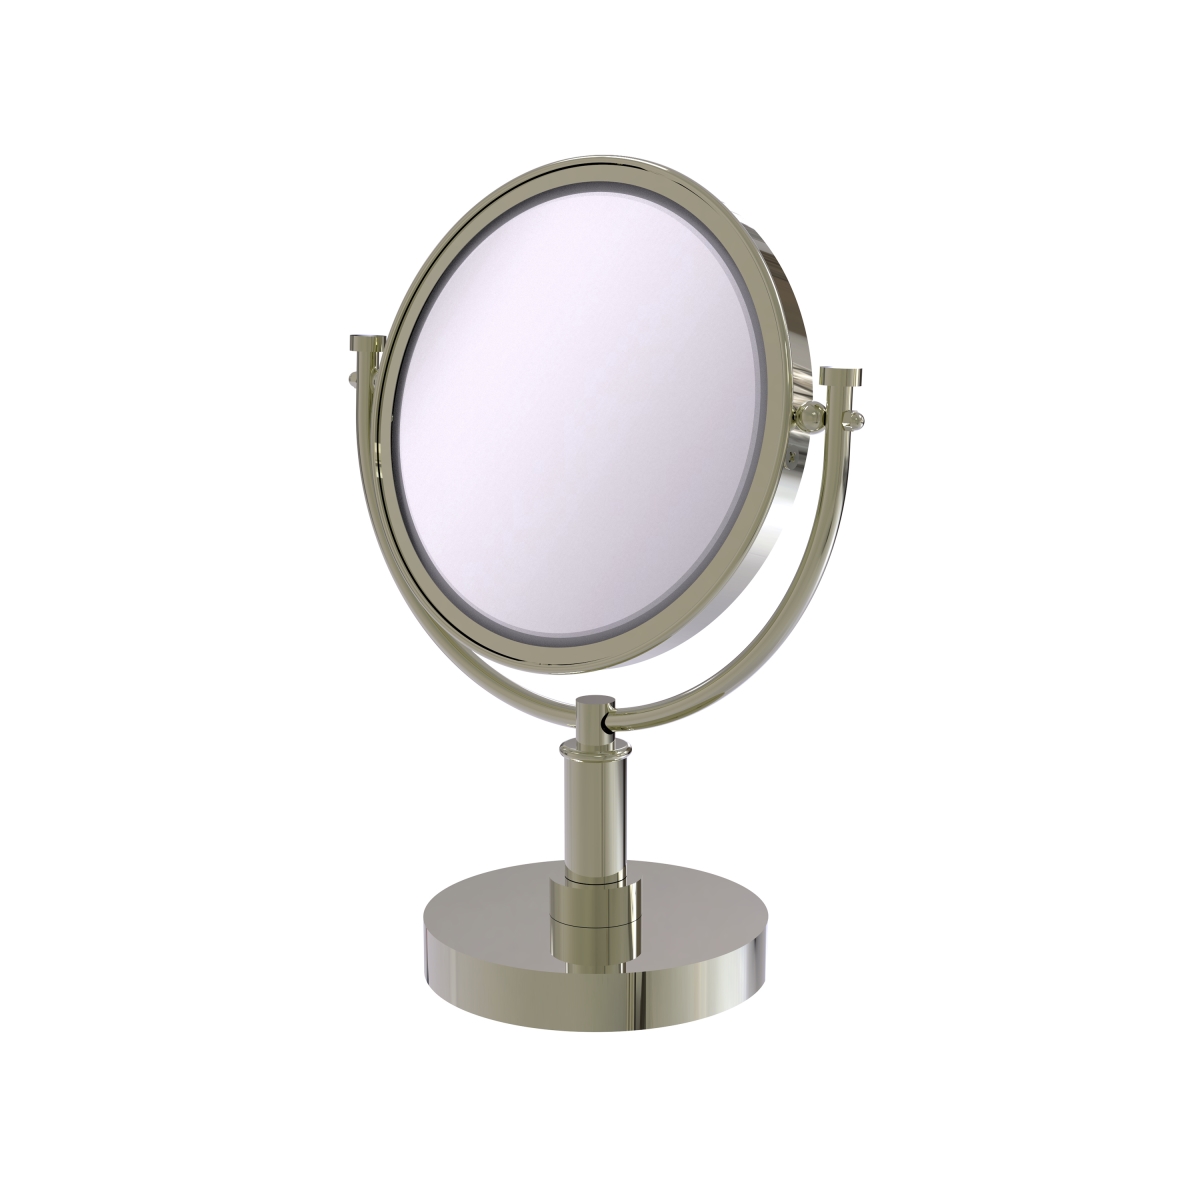 DM-4-2X-PNI 8 in. Vanity Top Make-Up Mirror 2X Magnification, Polished Nickel - 15 x 8 x 8 in -  Allied Brass, DM-4/2X-PNI